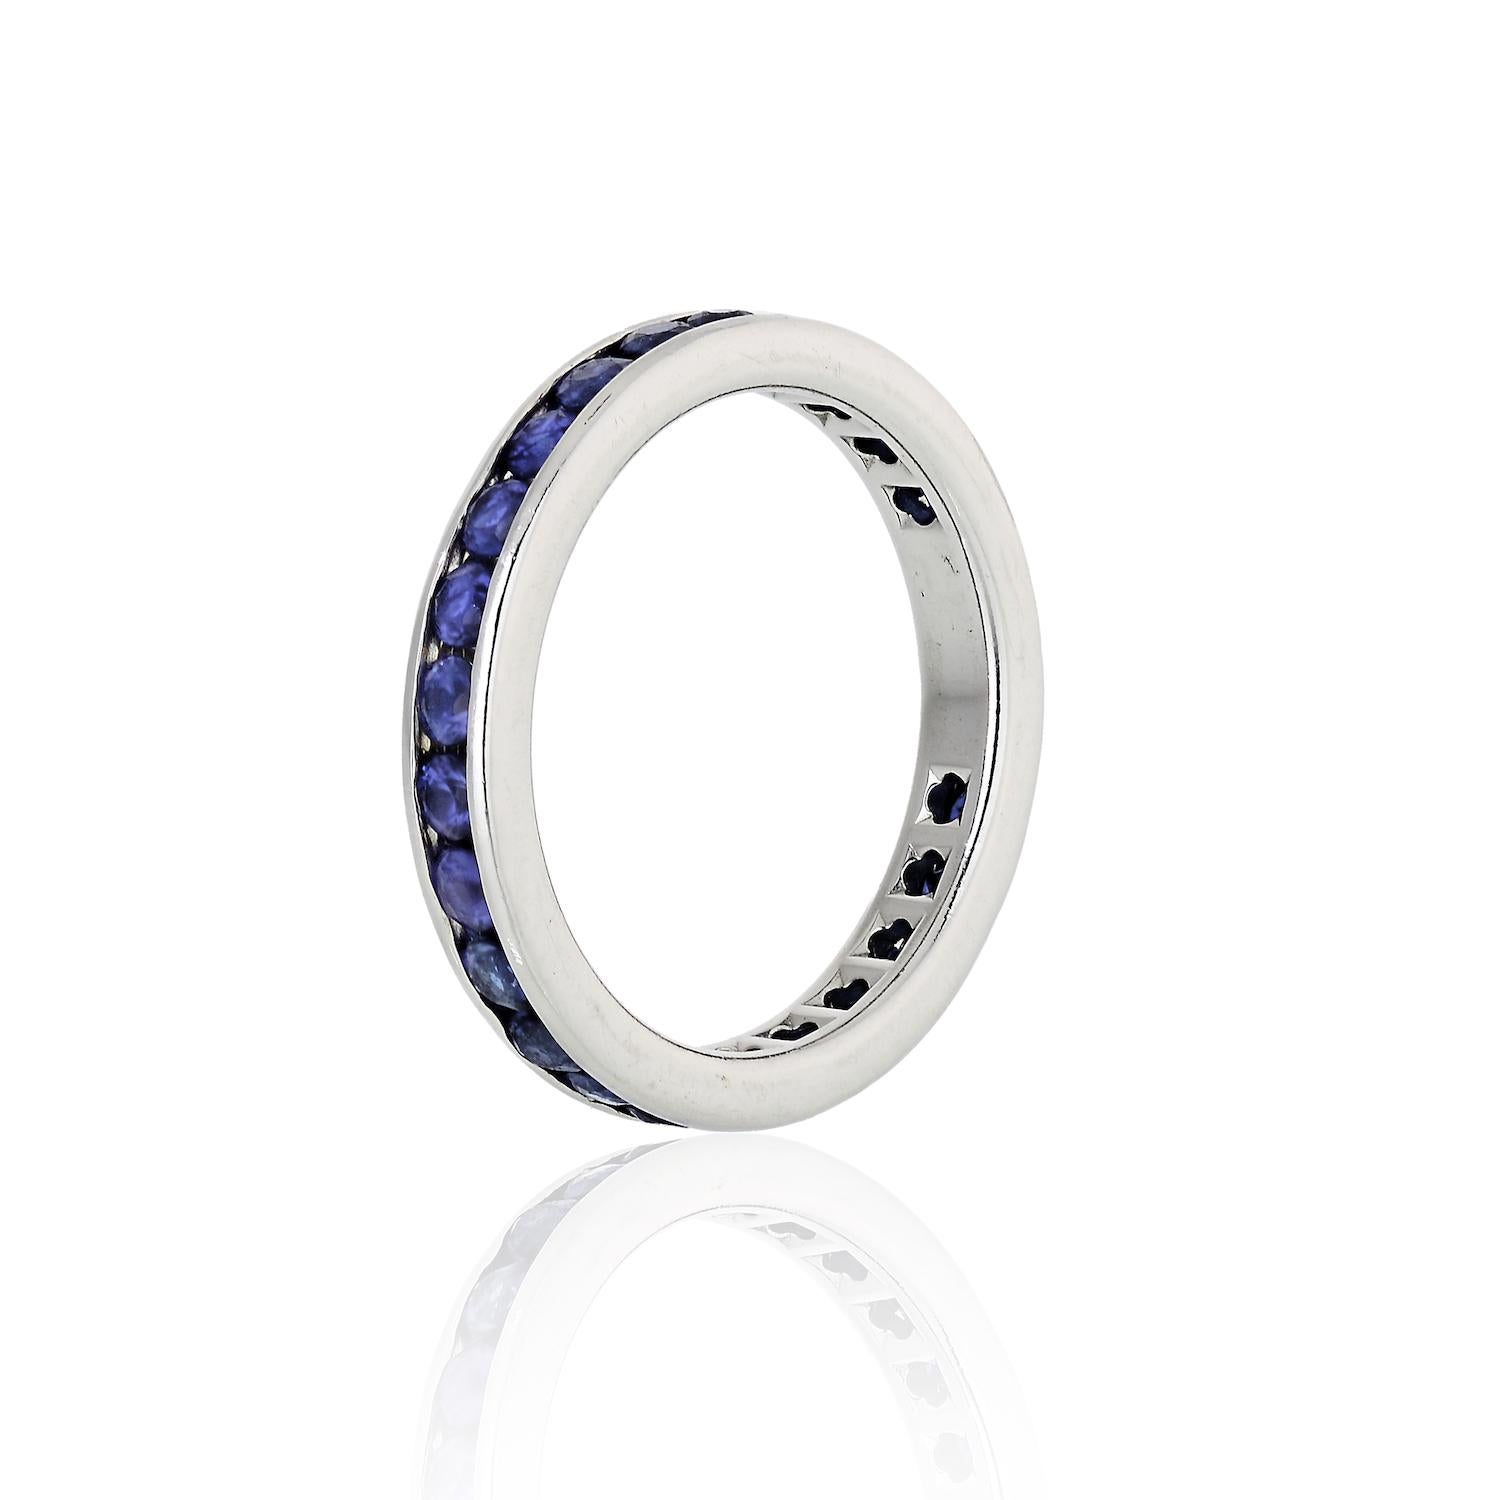 Sapphire eternity ring in Platinum set with round cut blue sapphires. 
Extra comfortable on the finger with softly rounded edges. 
Ring Width: 3mm
Ring Size: 5
Carat Weight: 1.00cts approx.